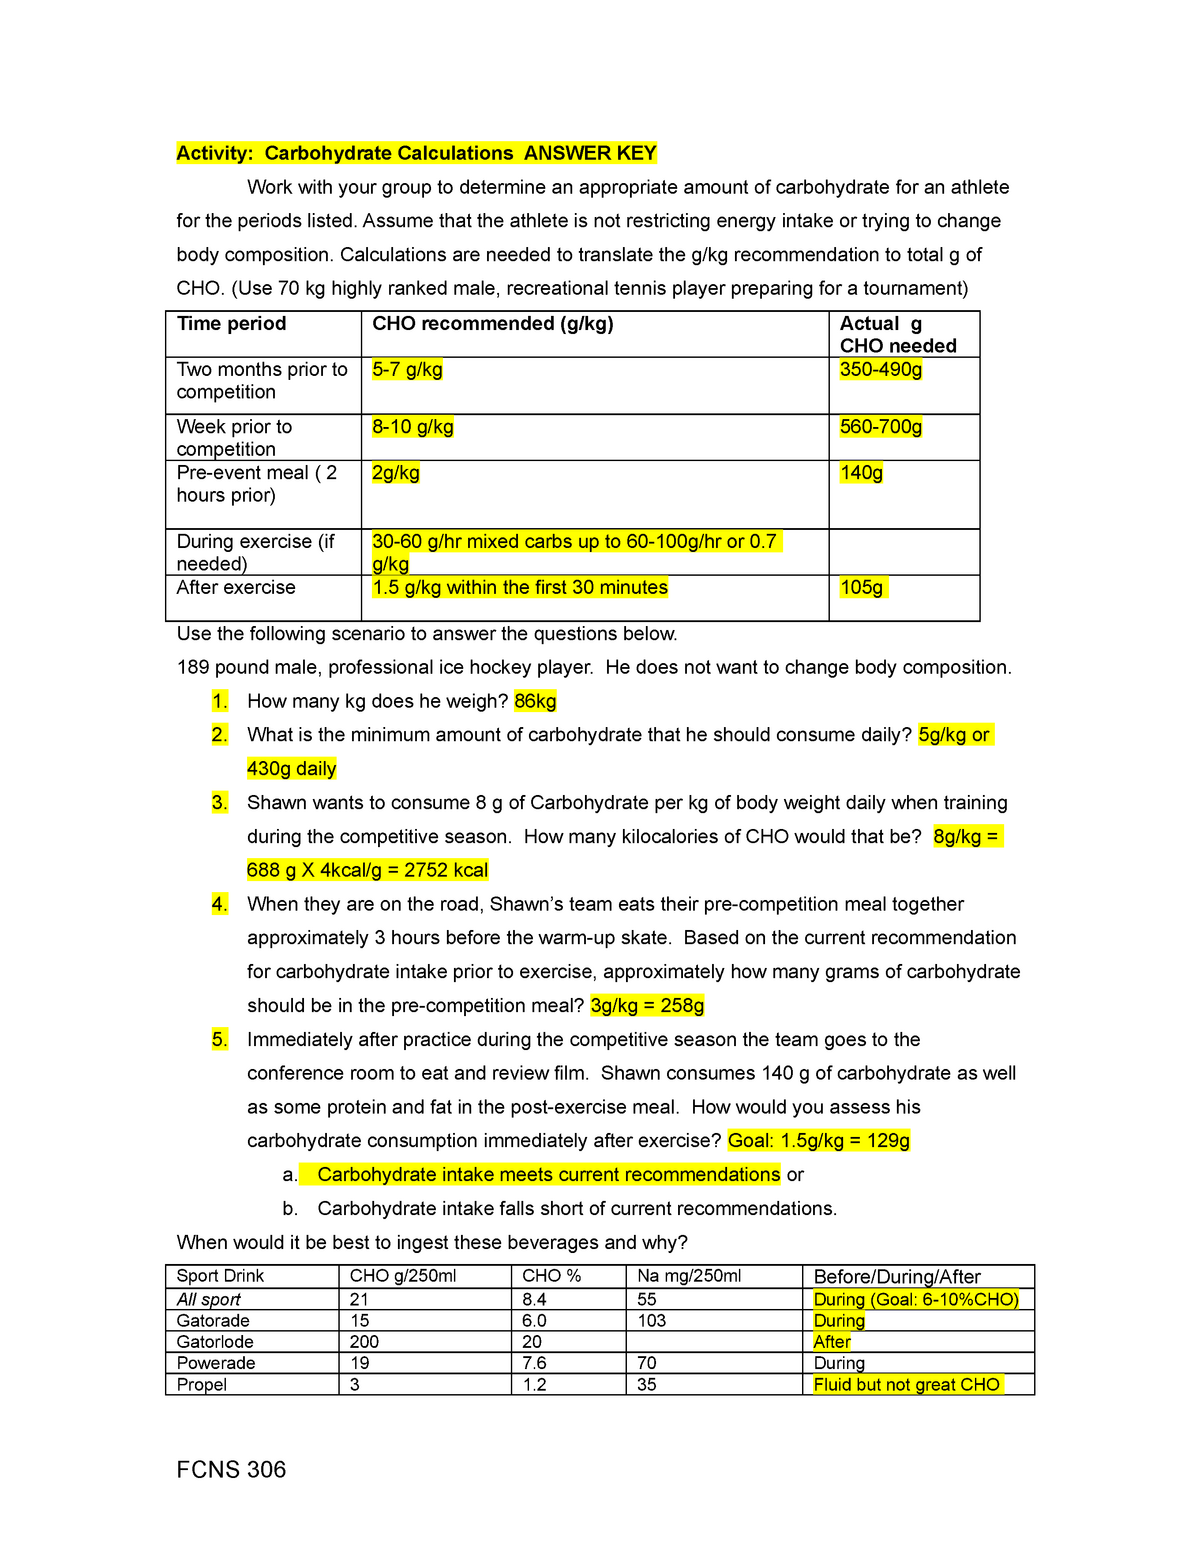 carb-worksheet-homework-assignment-activity-carbohydrate-calculations-answer-key-work-with